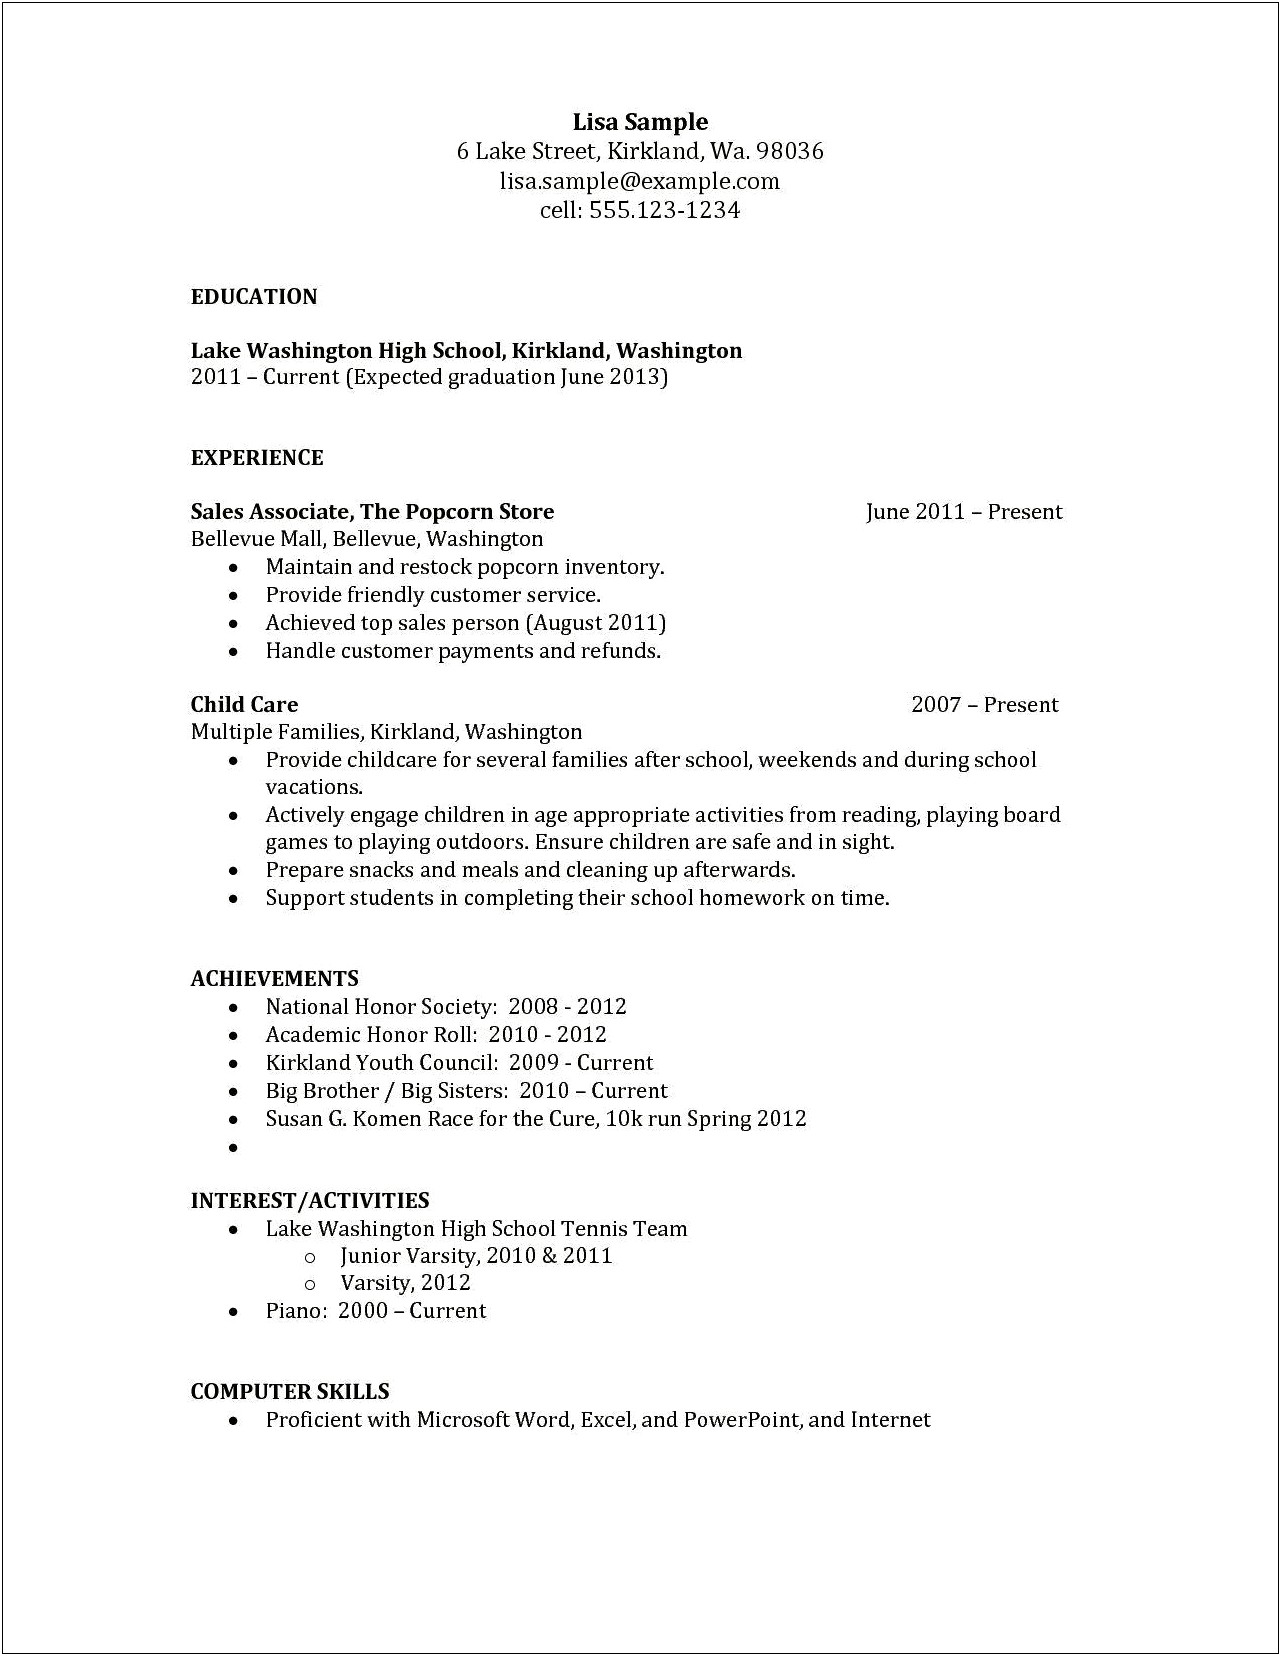 High School Student Npo Experience Resume